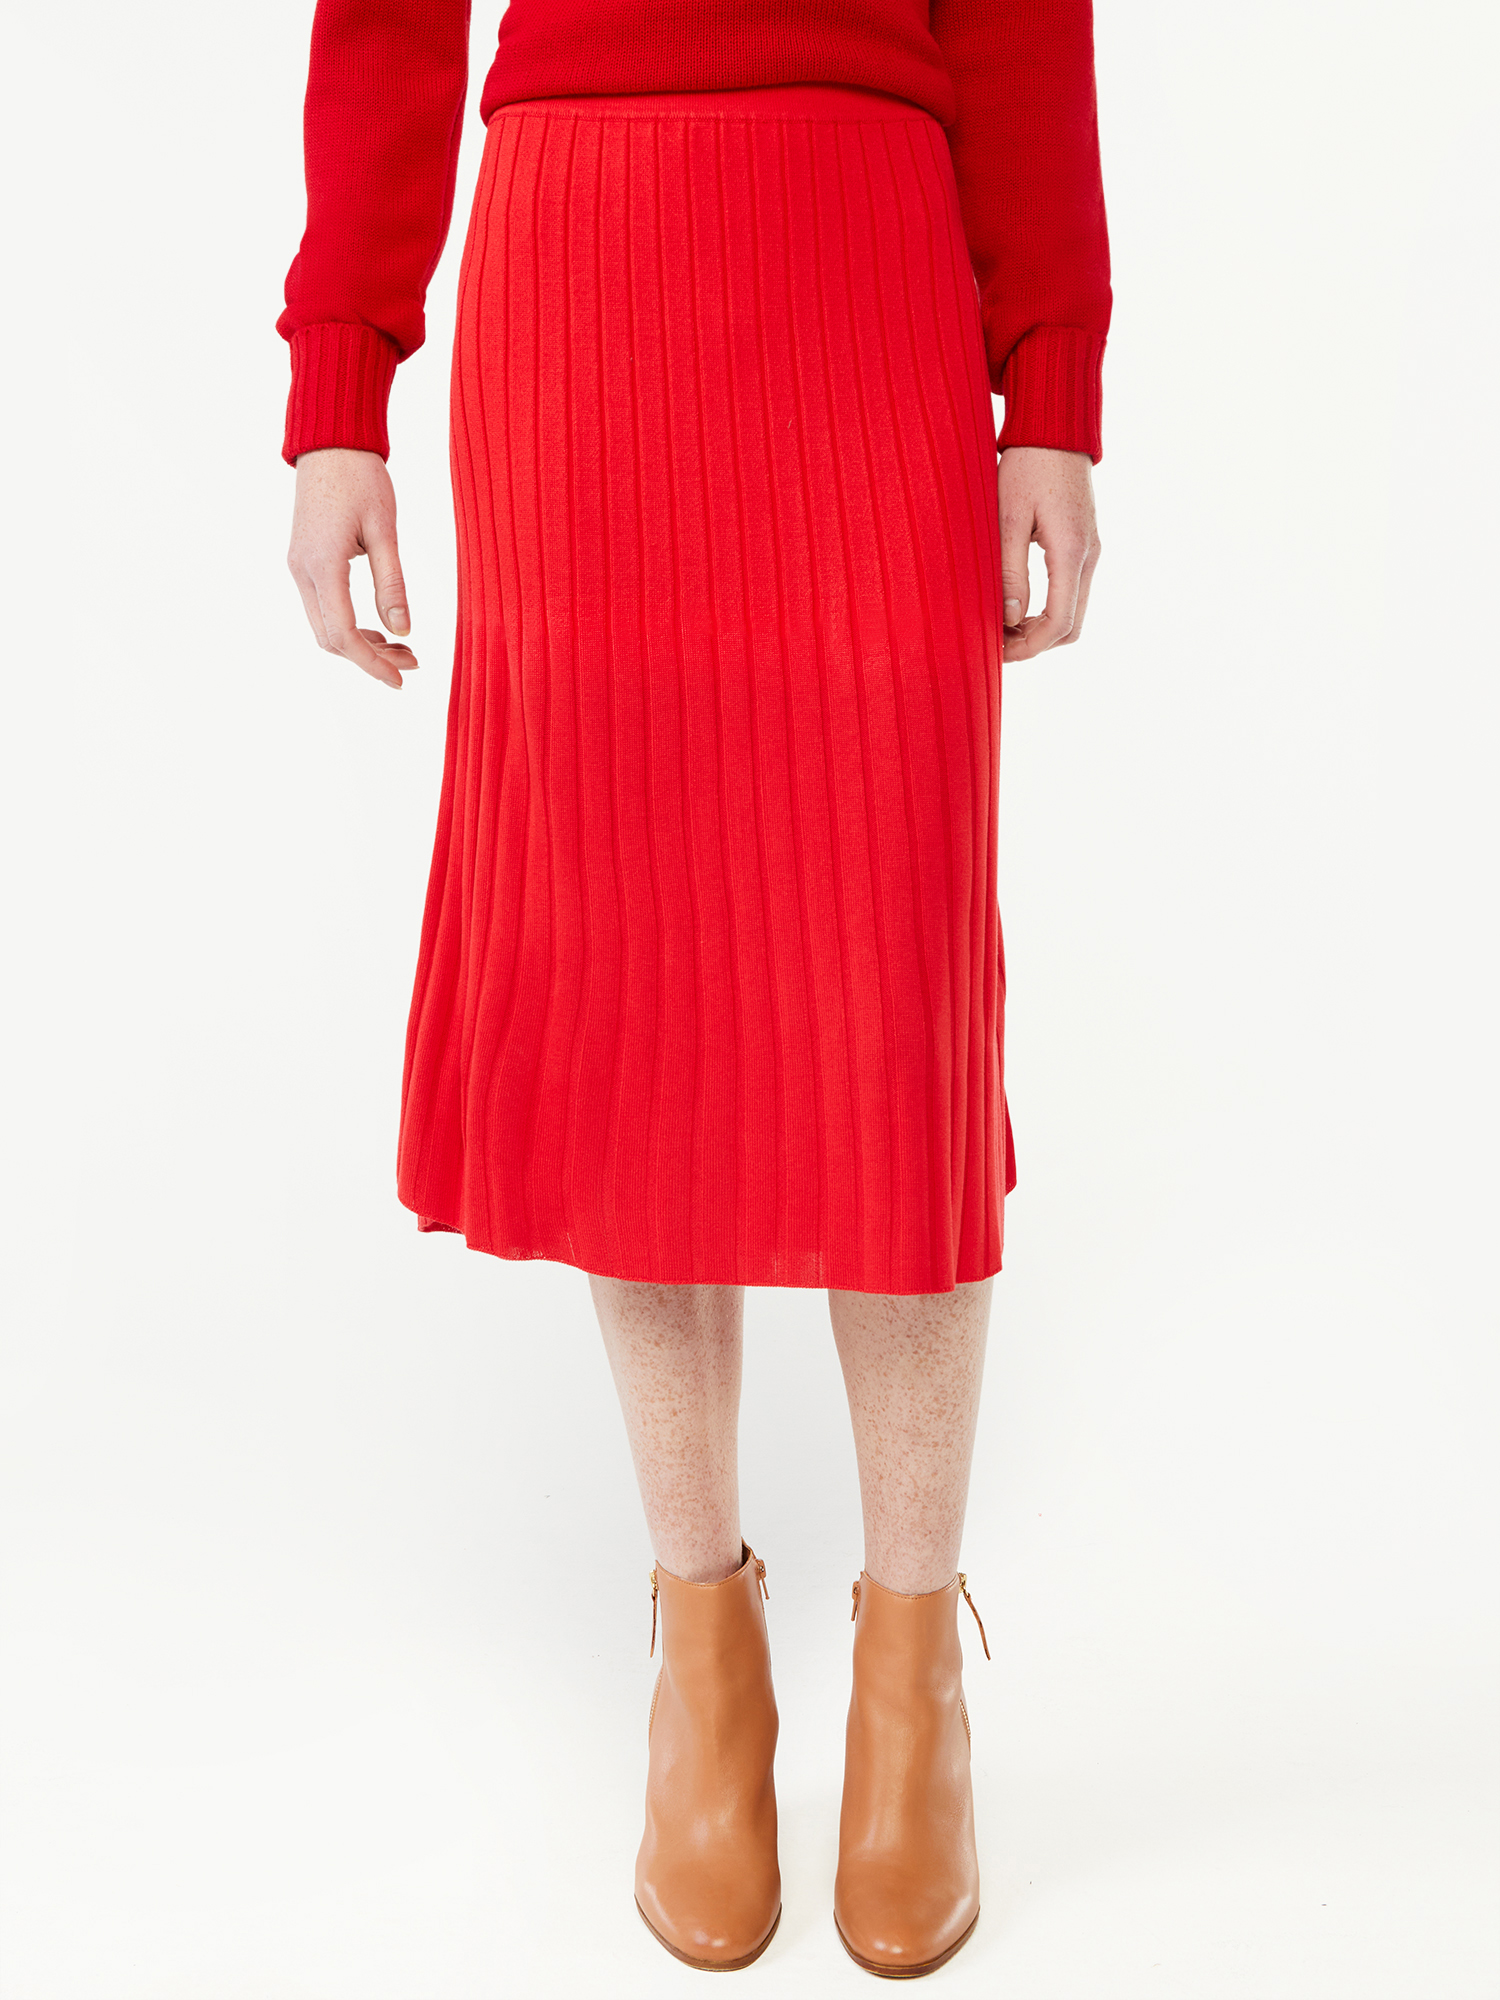 Free Assembly Women's Pleated Midi Sweater Skirt - image 1 of 6